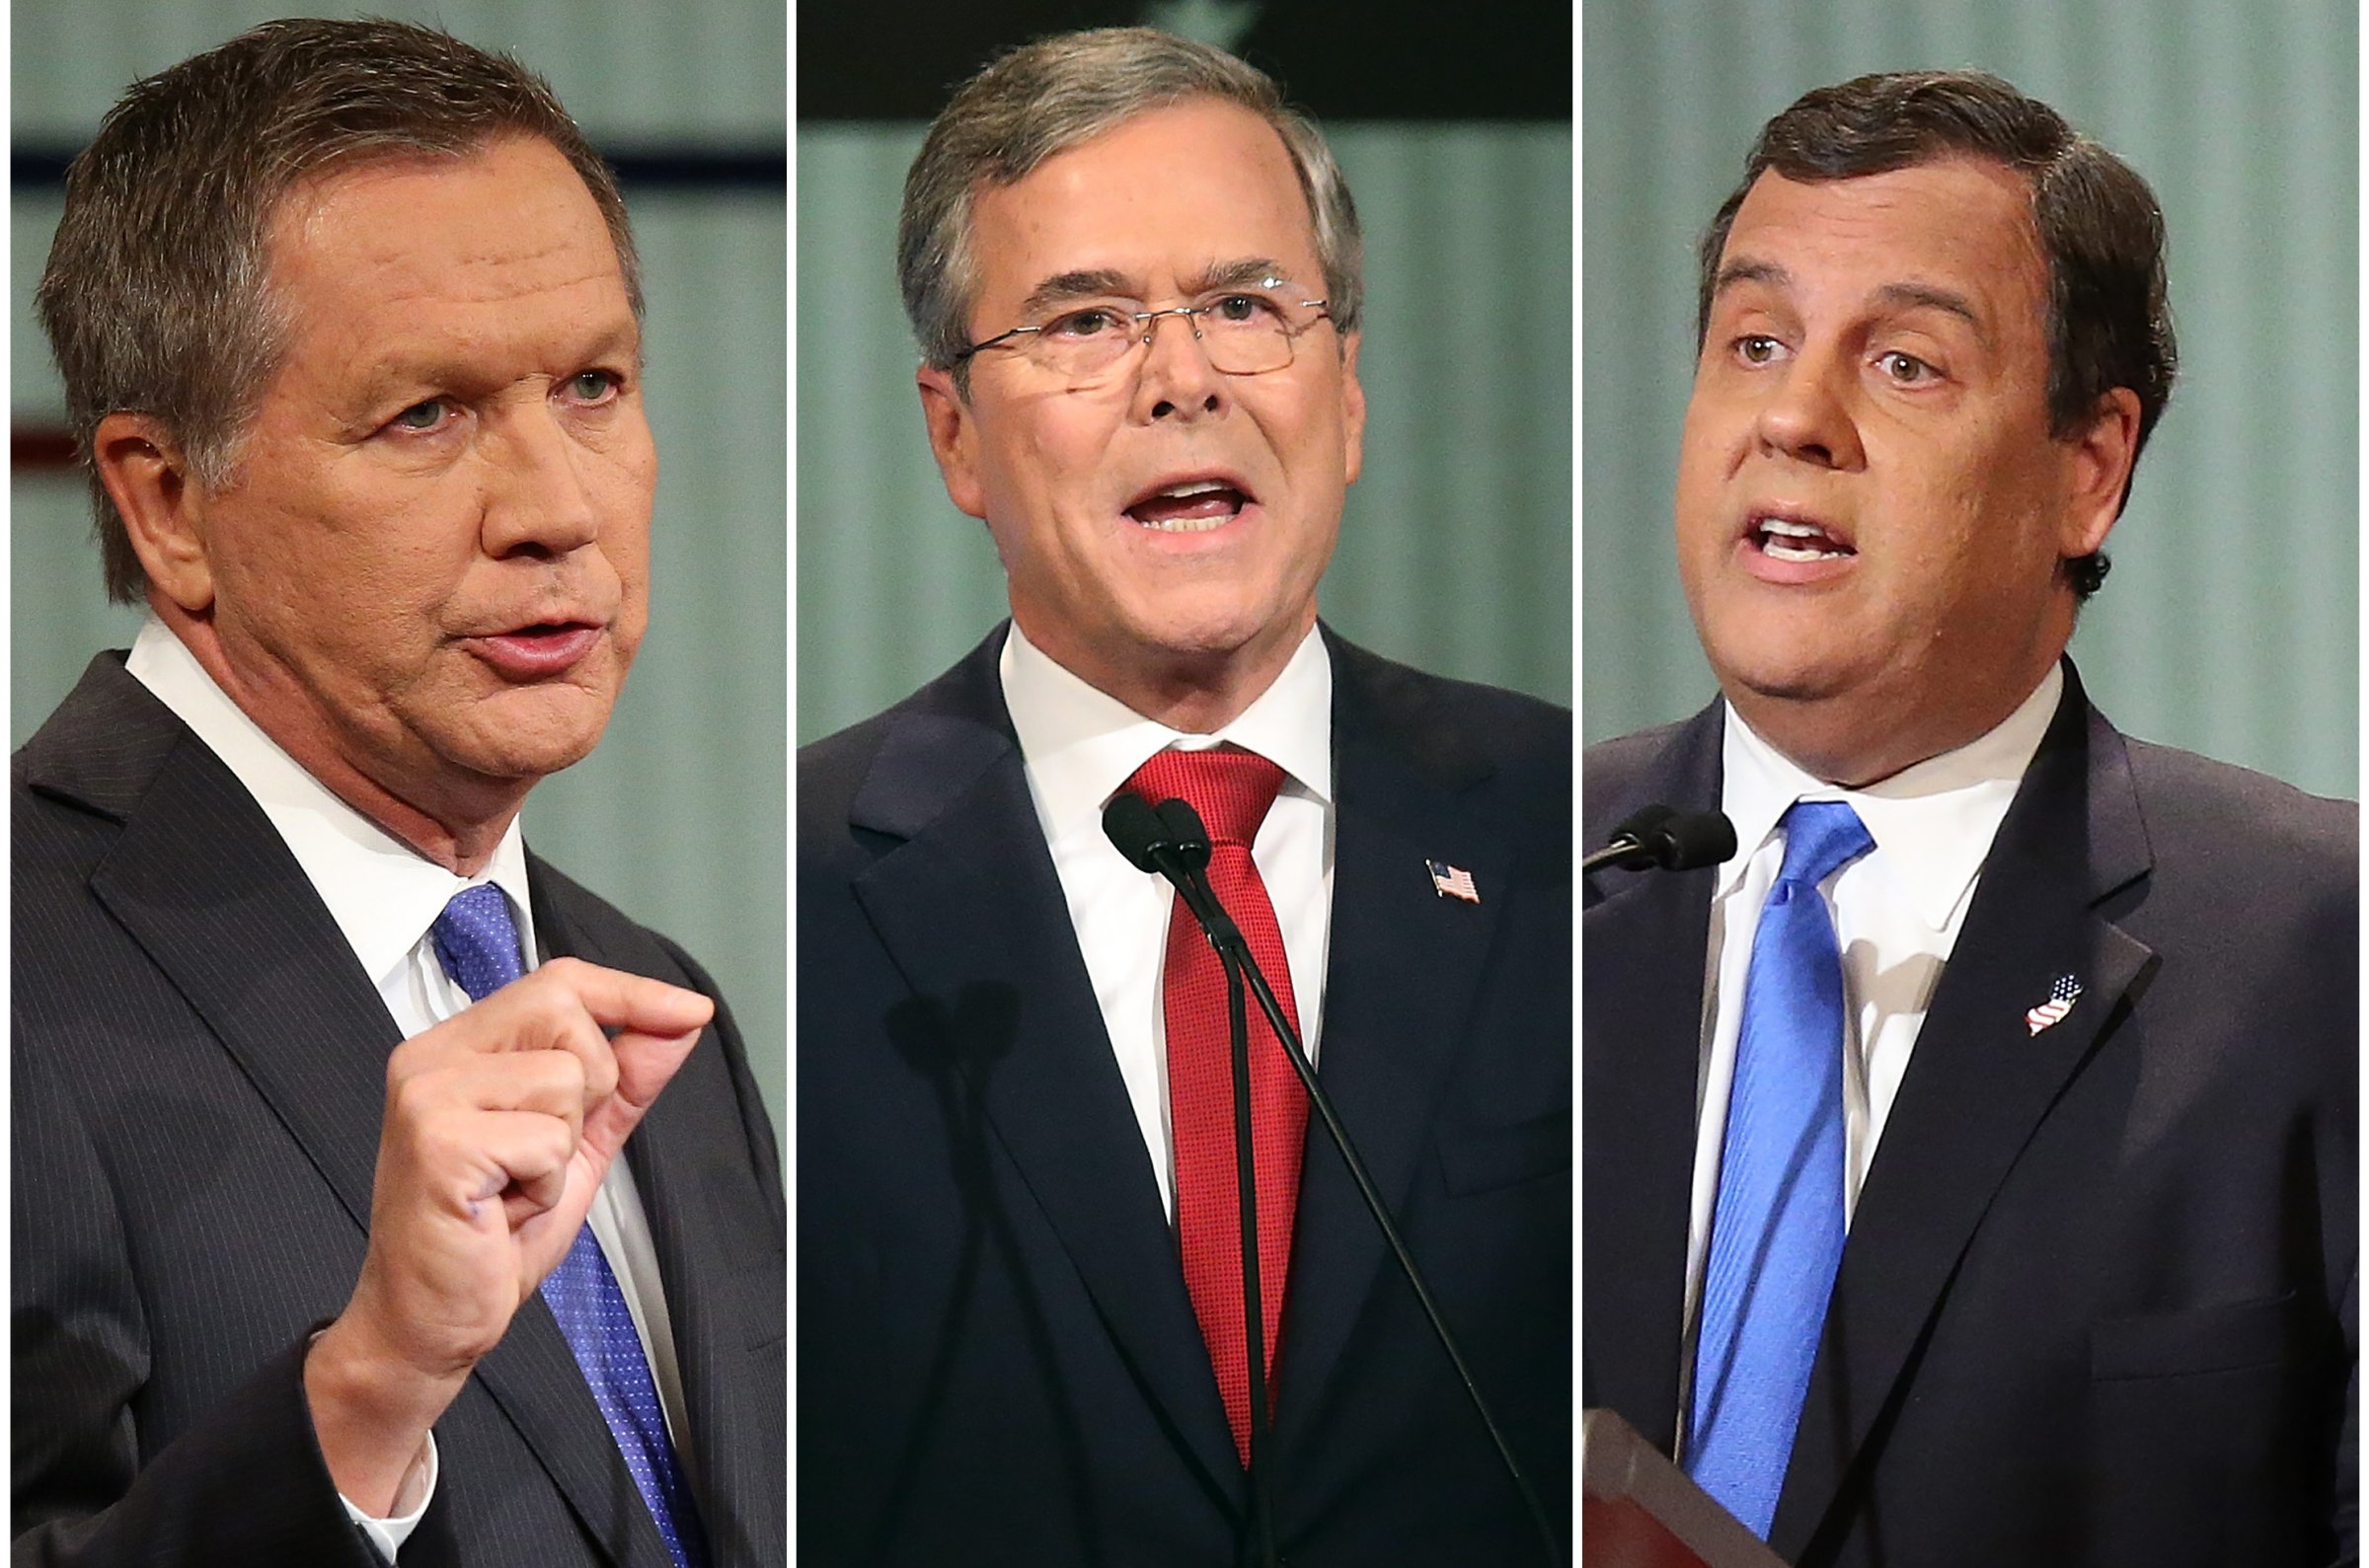 This combination image shows, from left, Republican governors John Kasich, Chris Christie and Jeb Bush at the Republican presidential debate on Jan. 14, 2016 in North Charleston, S.C.